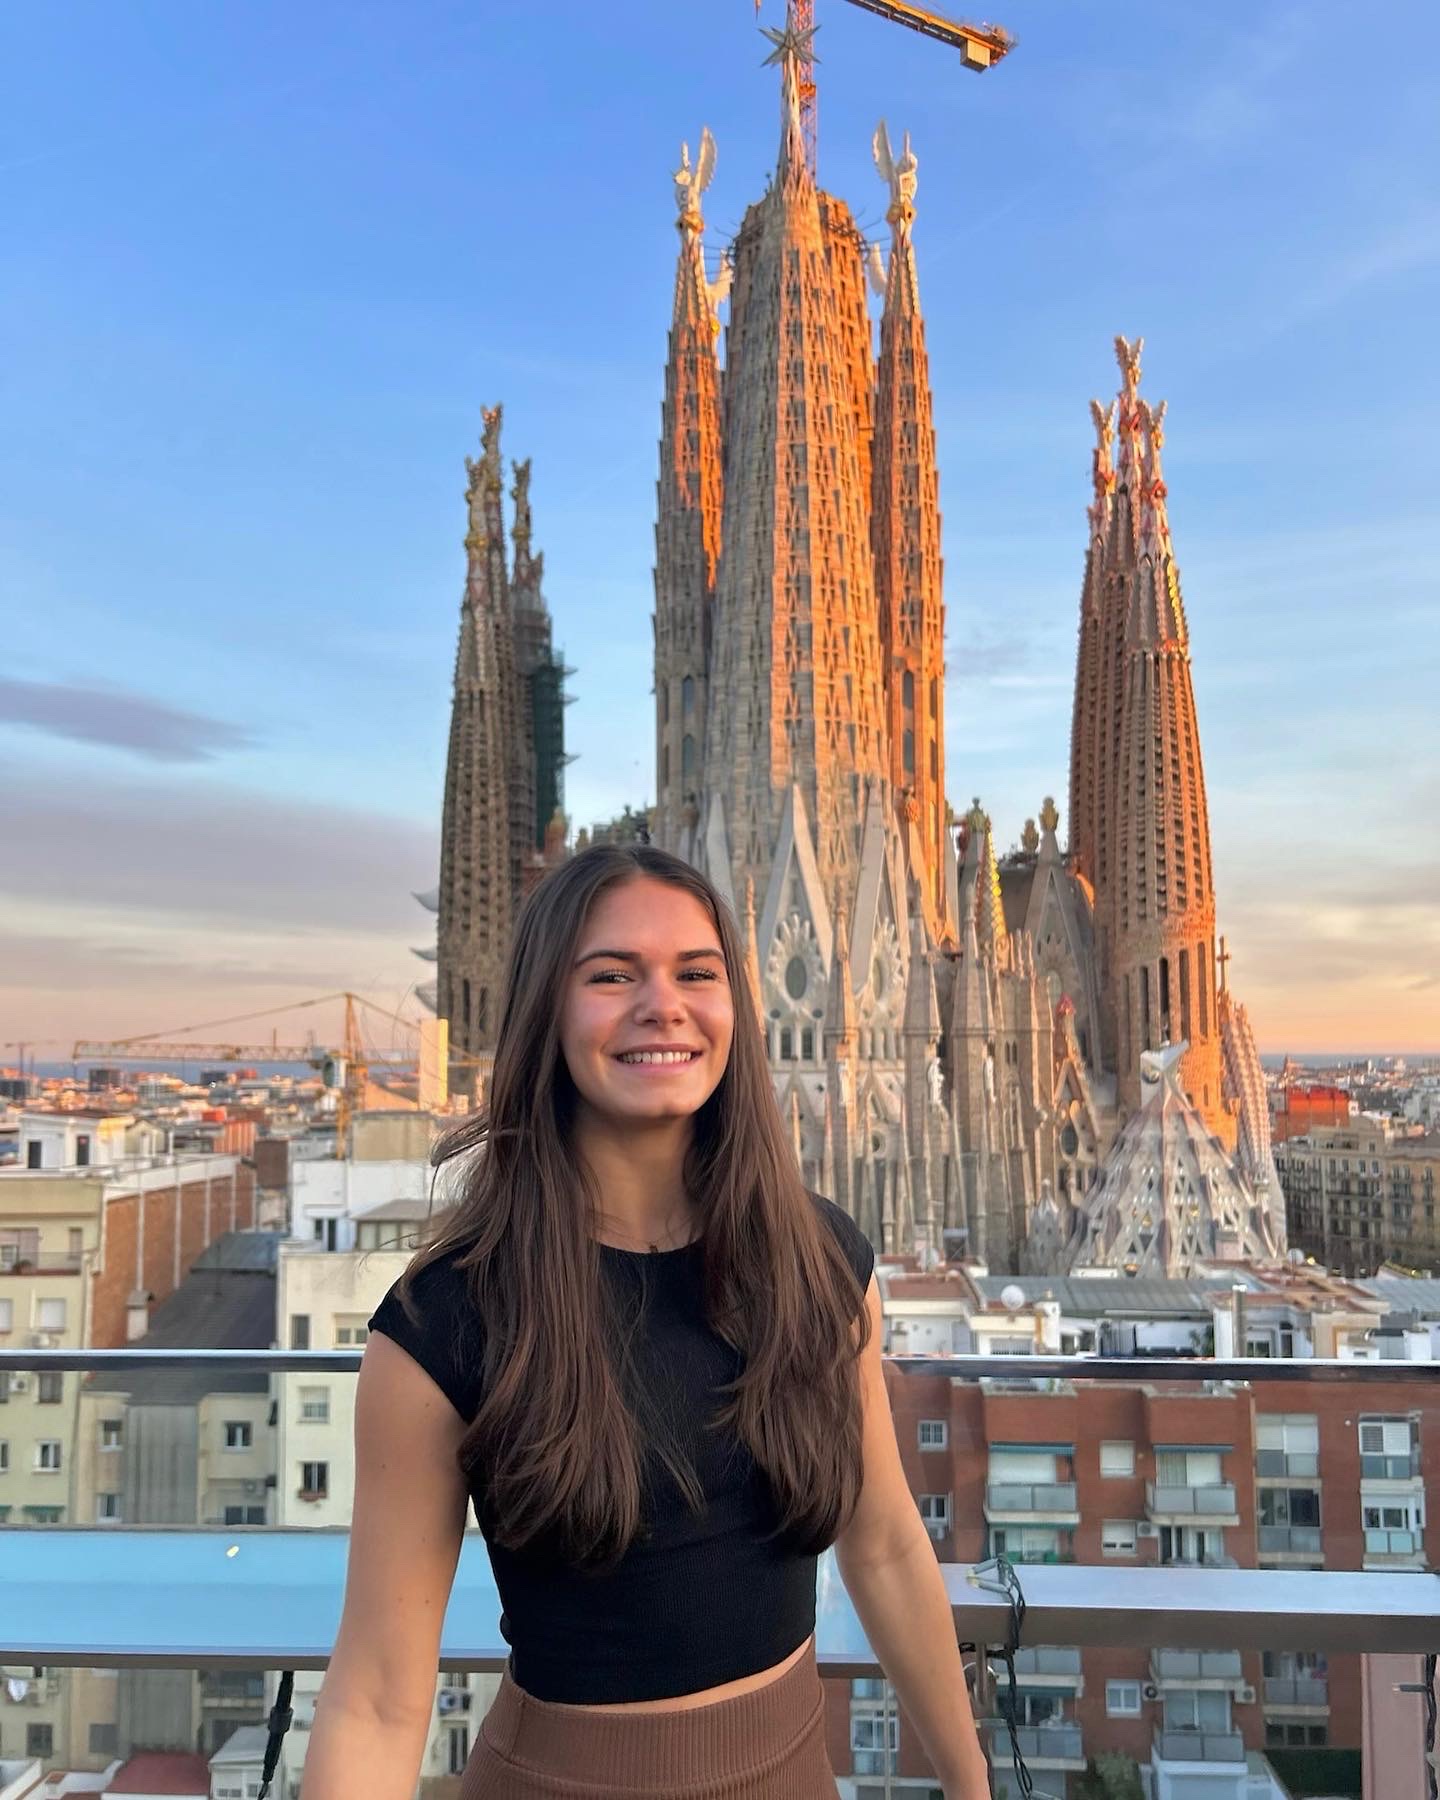 Posing for a picture at sunset with an incredible view of La Sagrada Familia